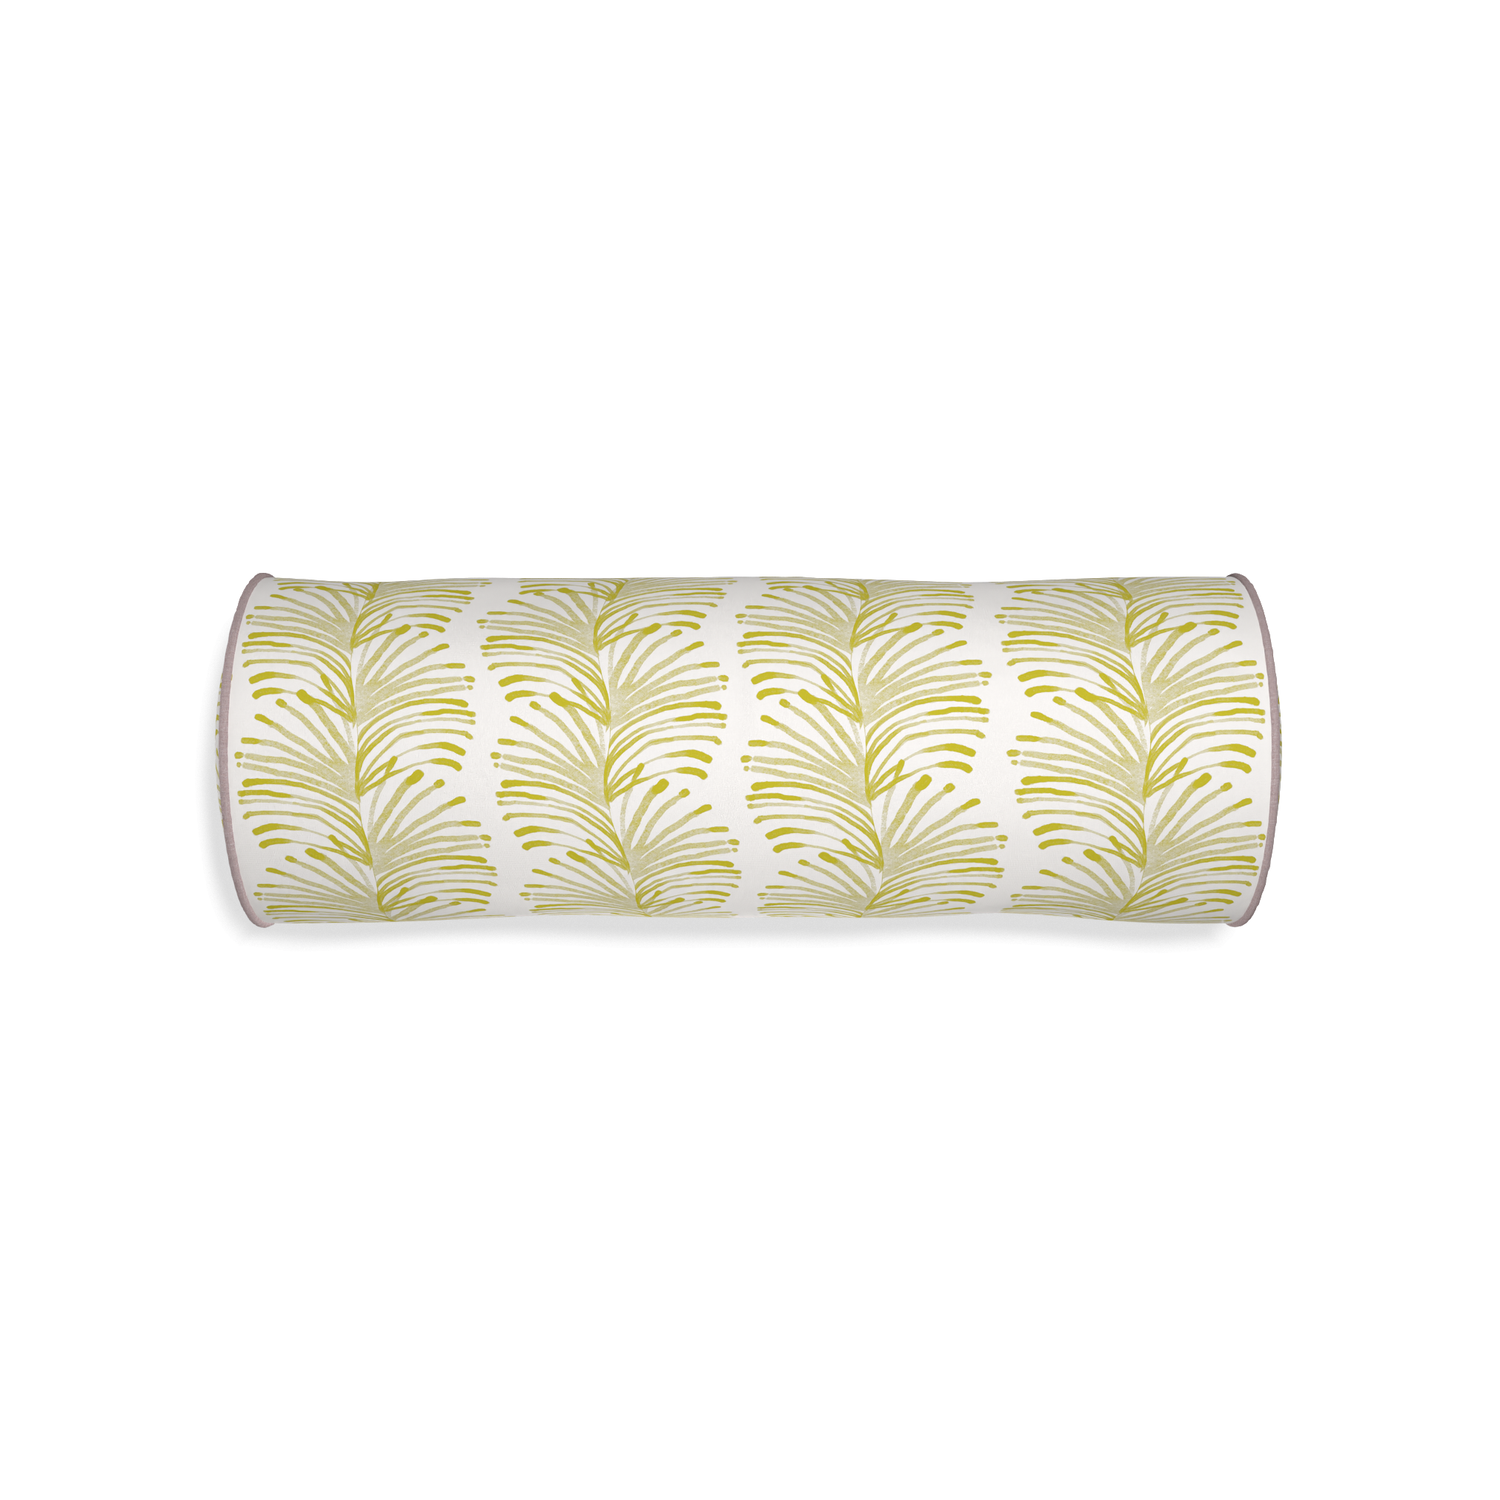 Bolster emma chartreuse custom yellow stripe chartreusepillow with orchid piping on white background